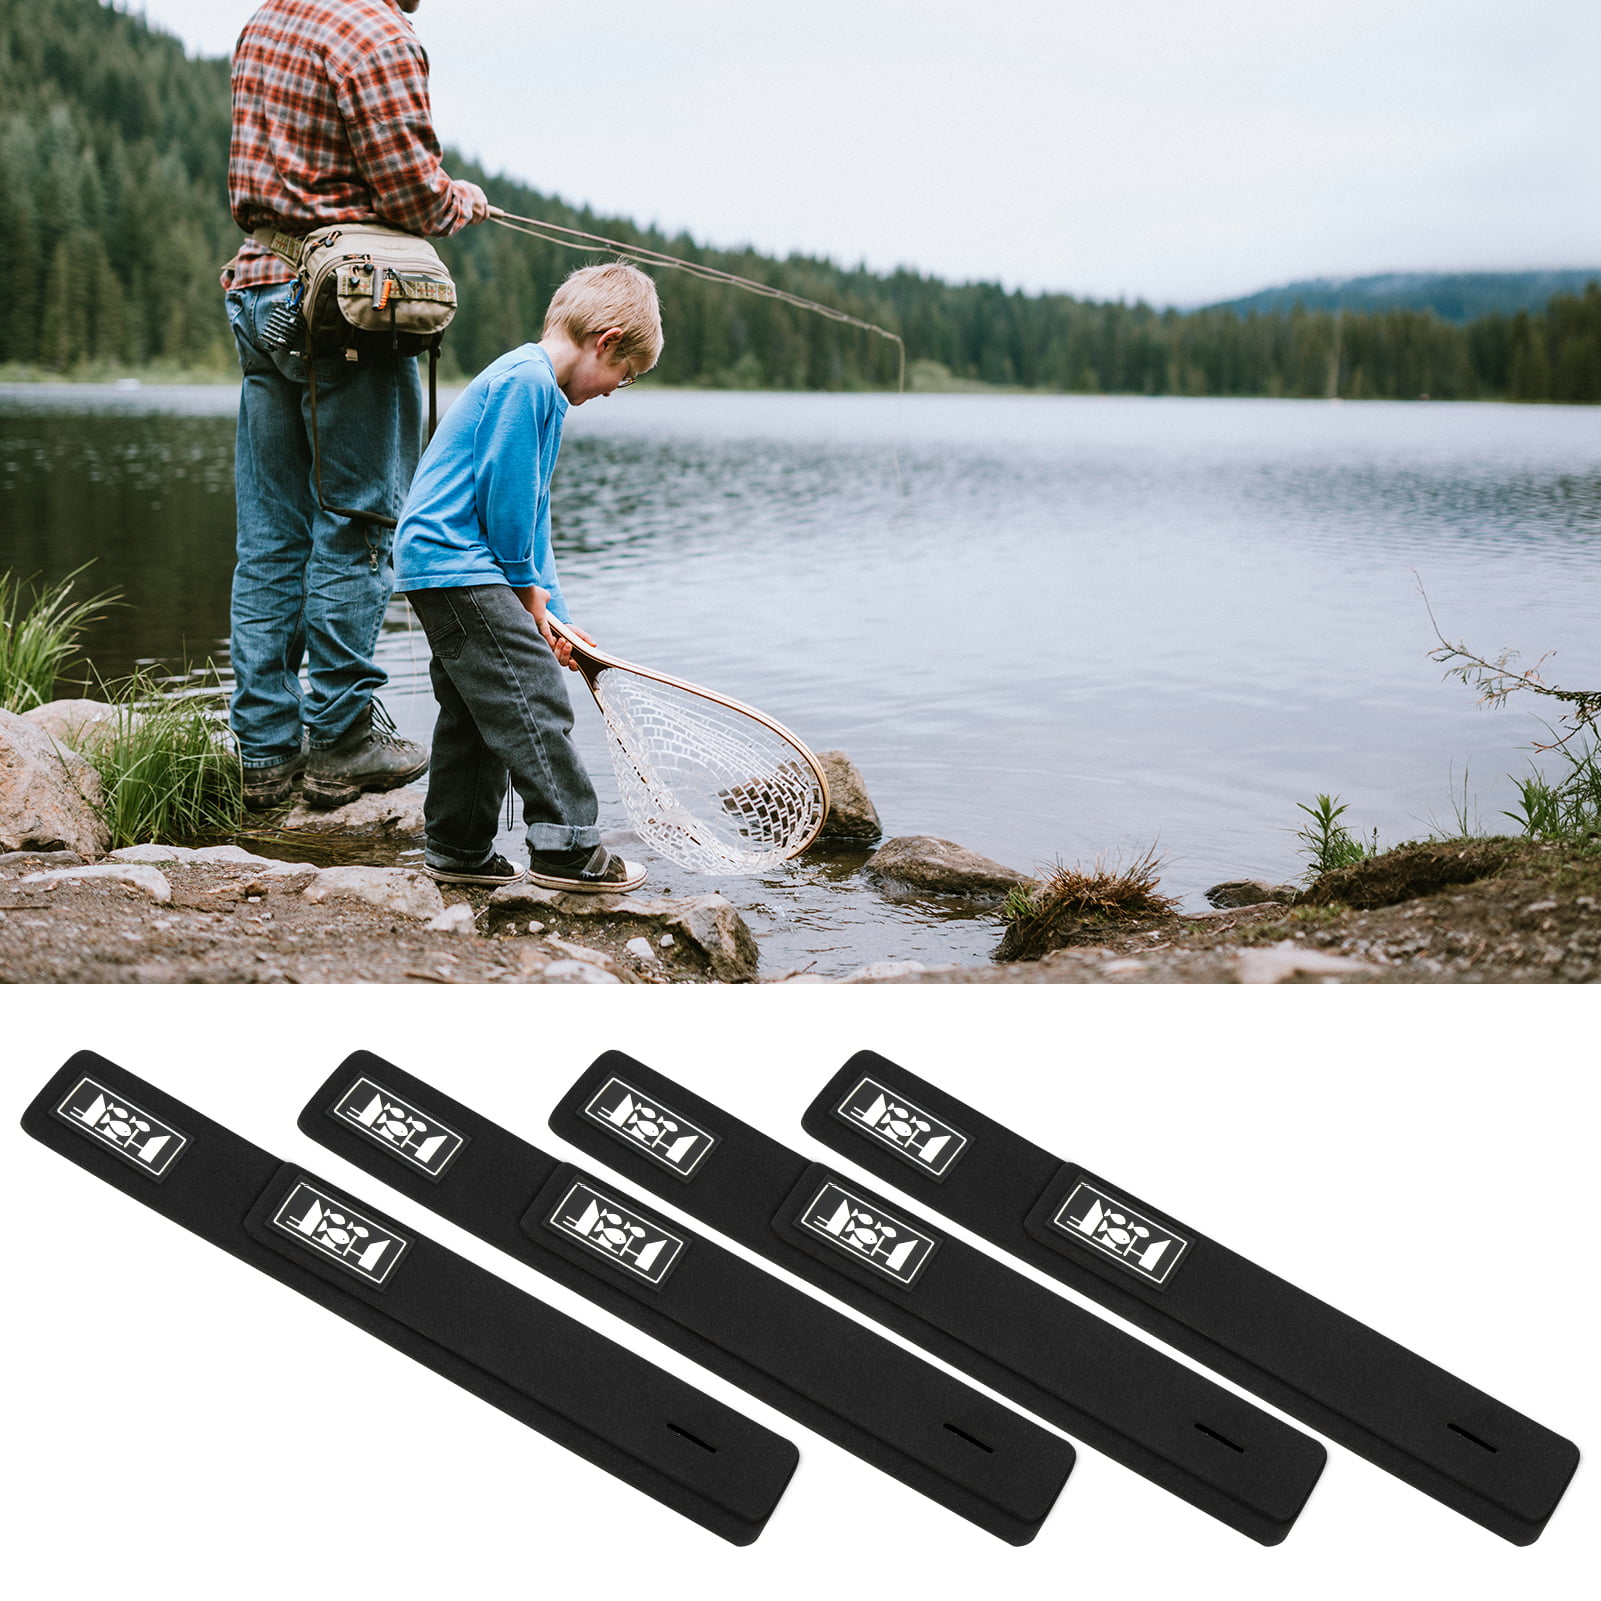 Fayisomia 4Pcs Fishing Tool Rod Bandage Belt Fish Hook Elastic Wrapping Tape Pole Bracket Accessory for Fishing in The Ocean Boats Rivers Lakes Pond Streams